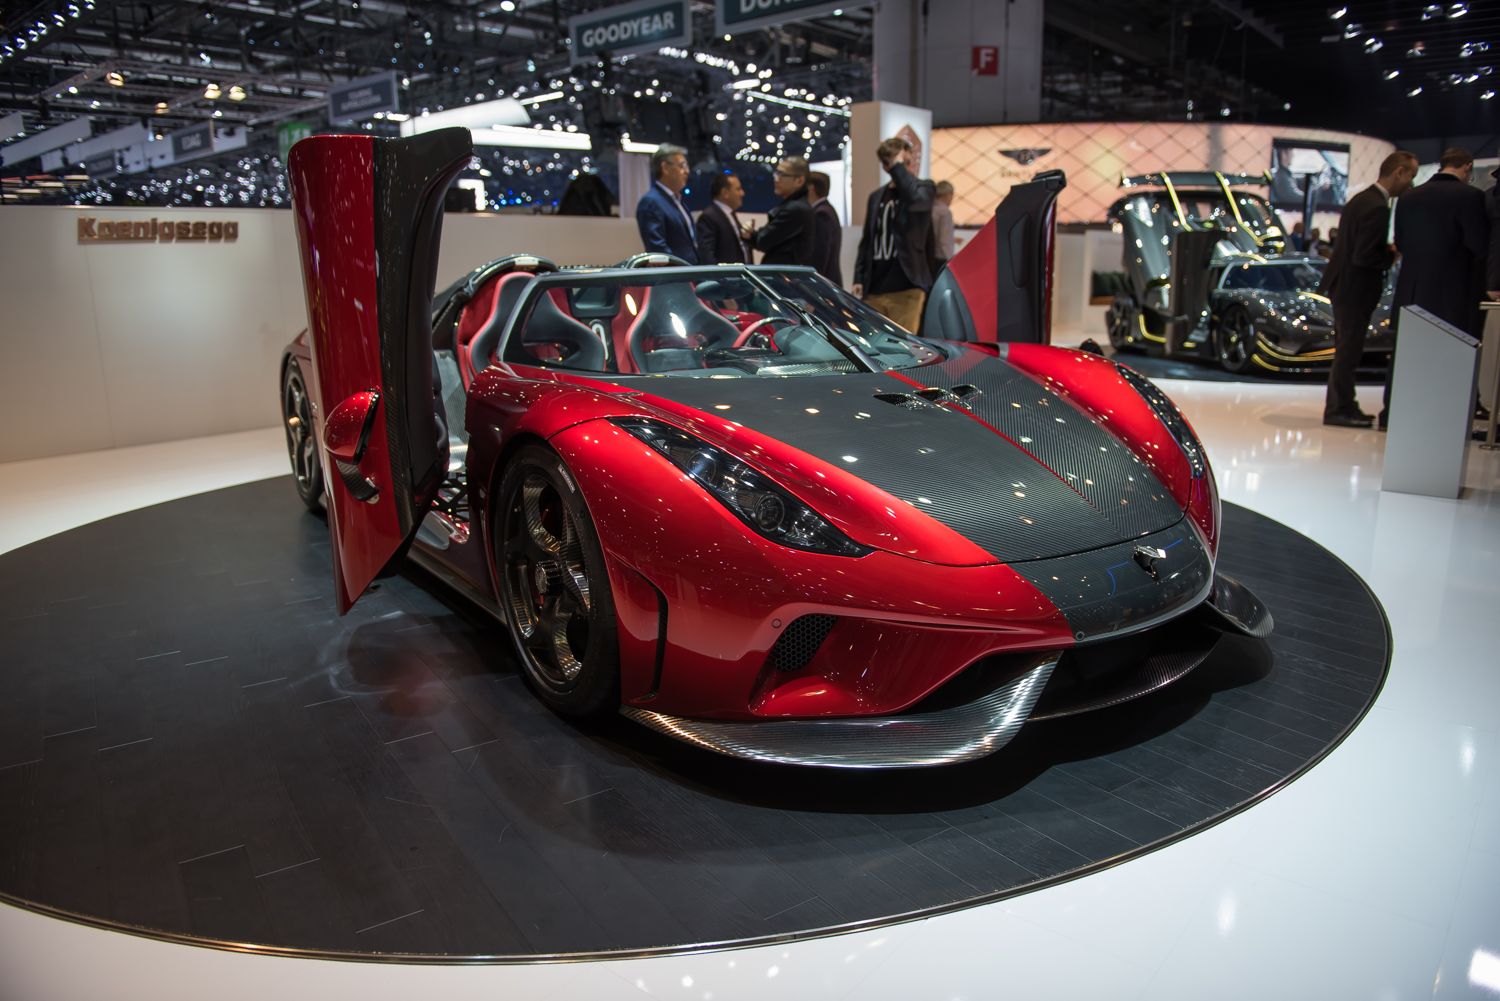 2019 Every Koenigsegg Regera Goes Through A 0-186 MPH Test Before Being Delivered